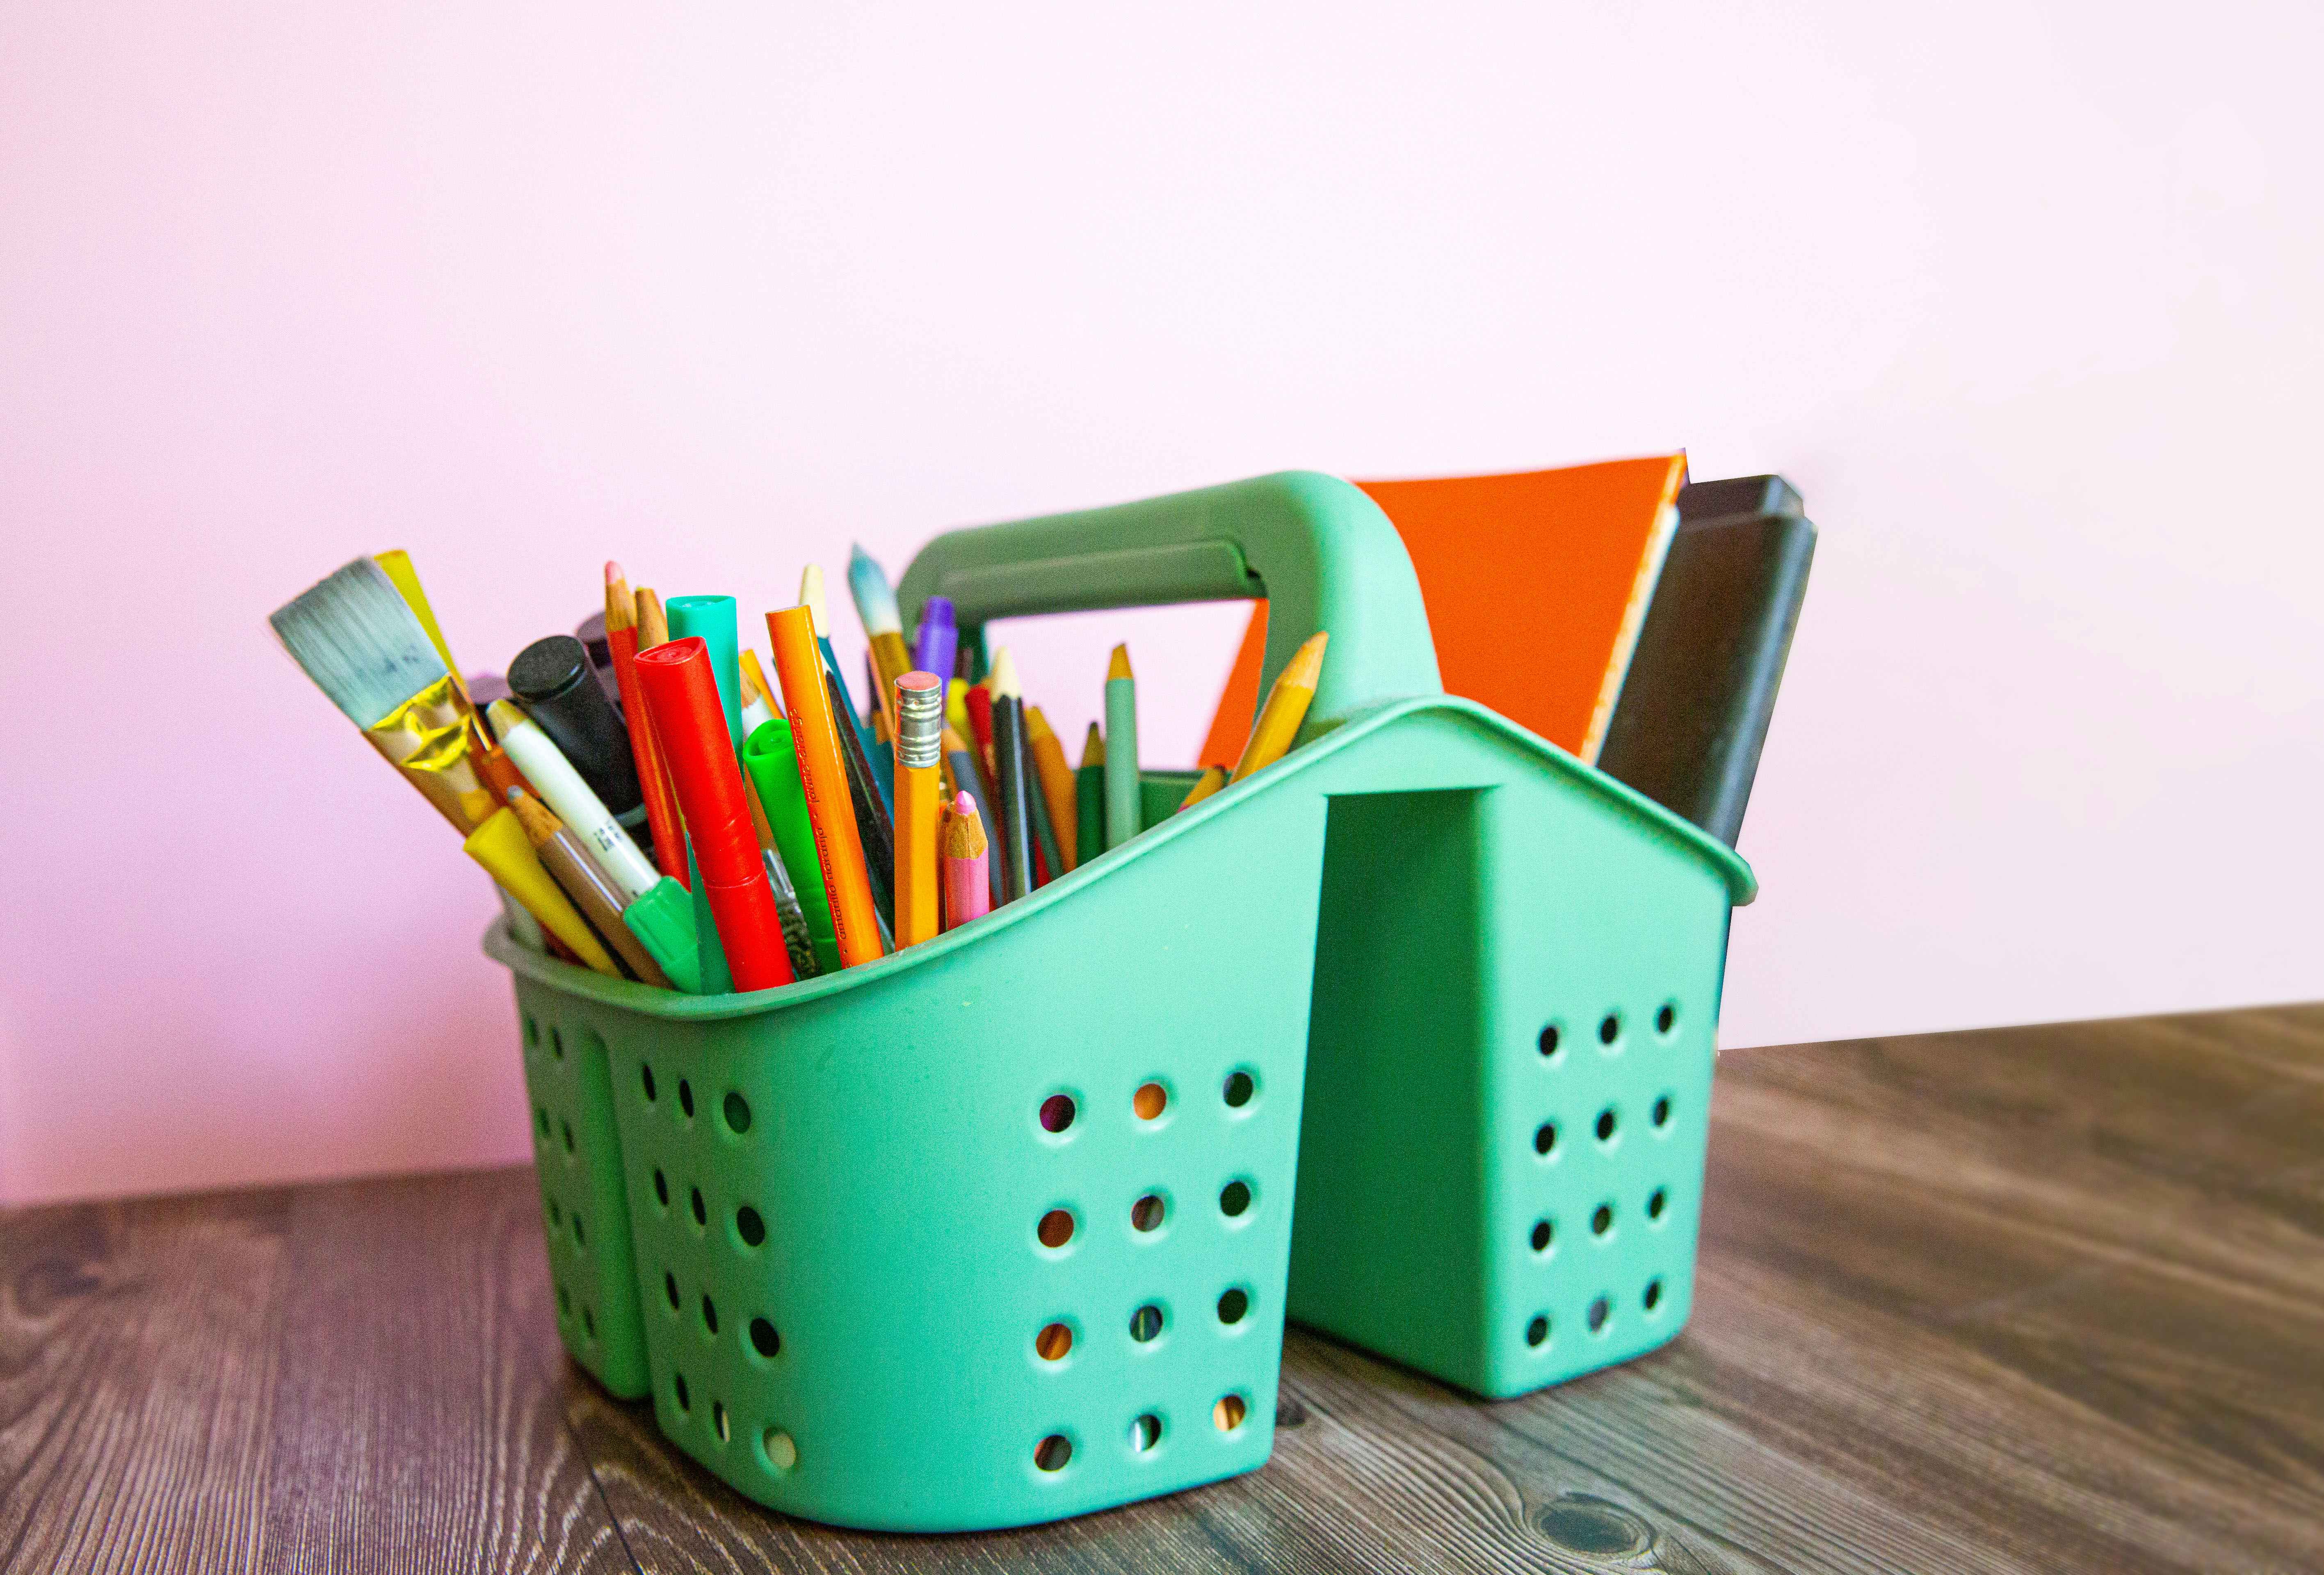 Six Tips to Conquer Your School Supplies List